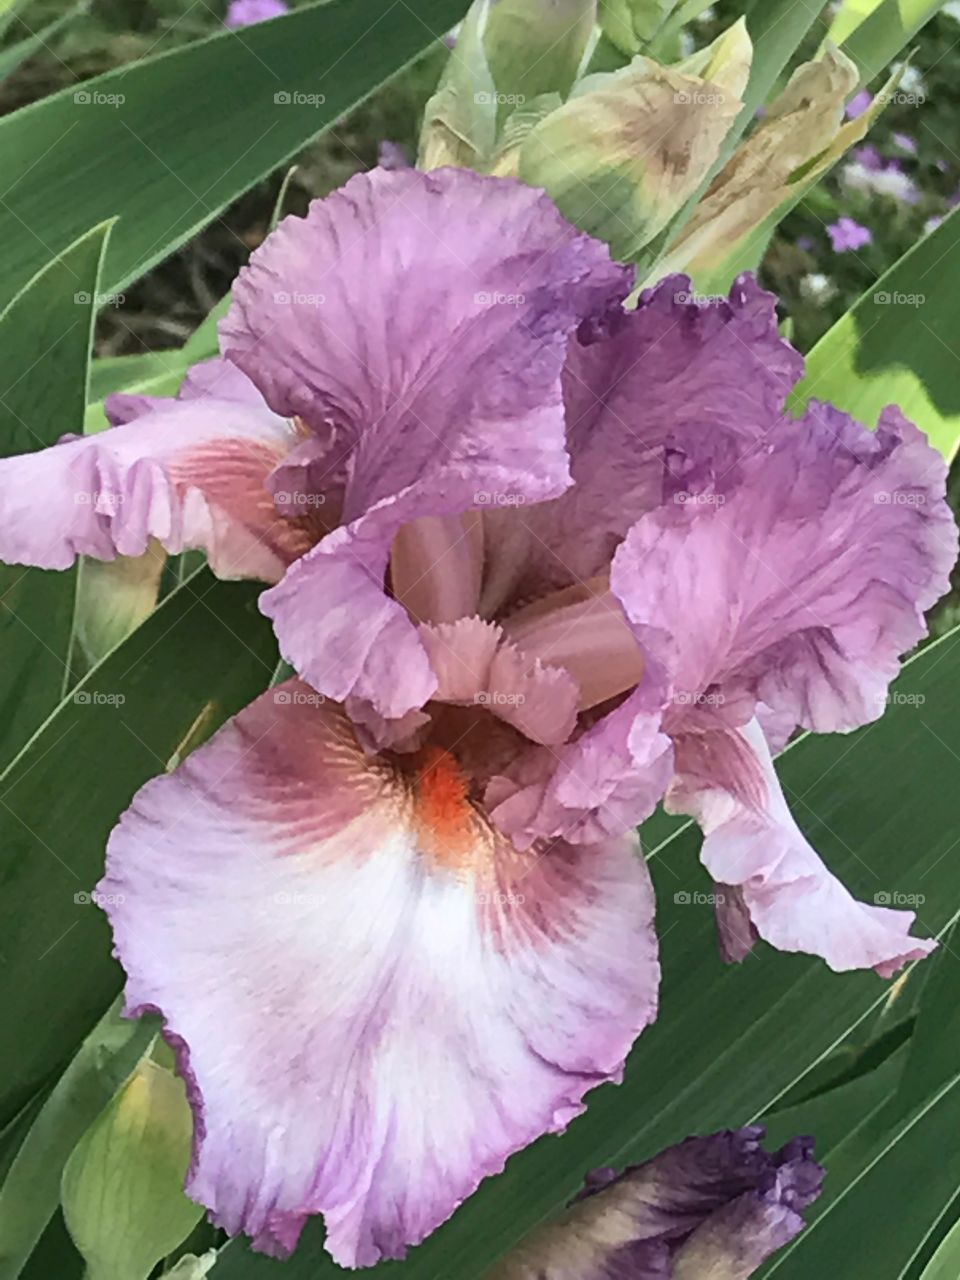 Mauve Iris Flowers in Garden with Green Leaves 